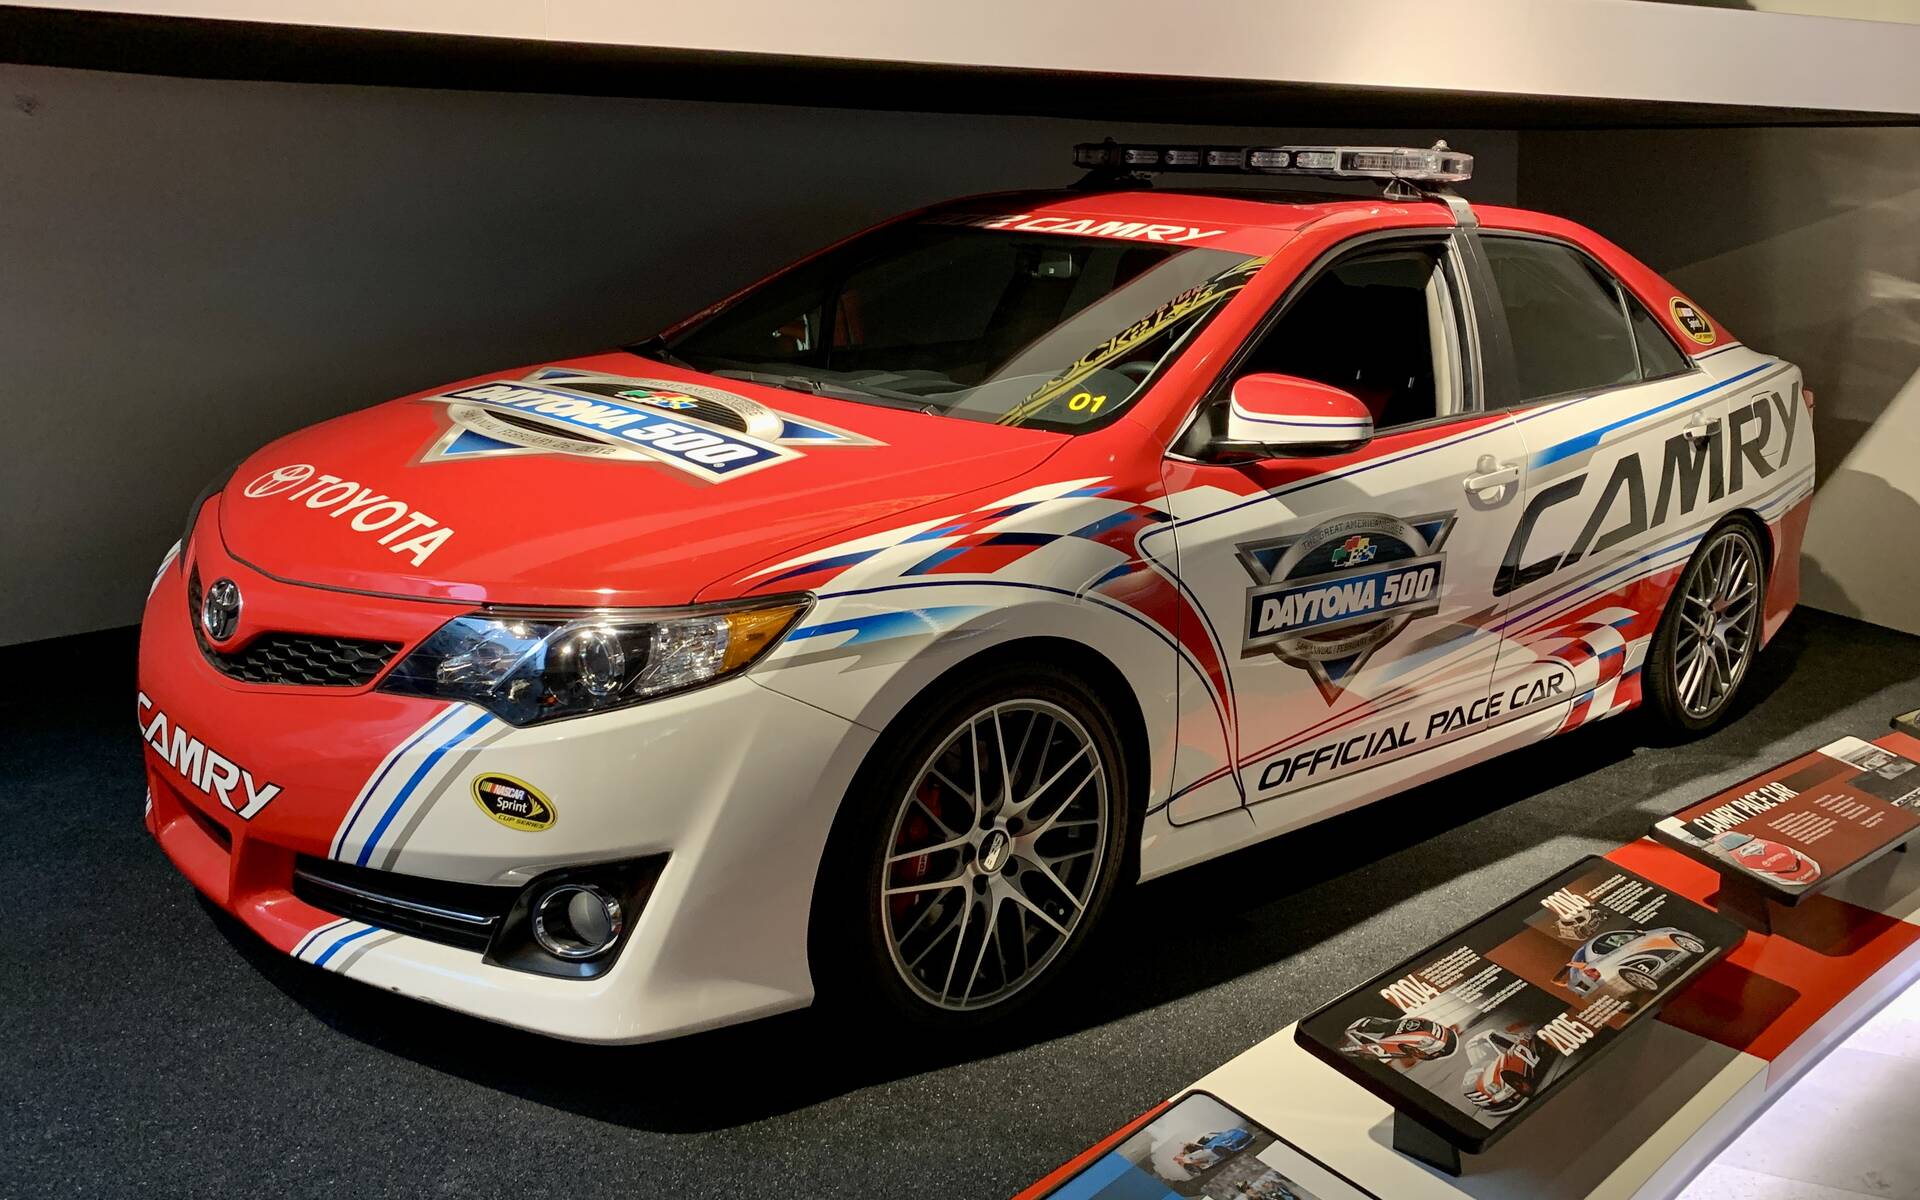 <p><strong>Toyota Camry Pace Car Daytona 500</strong></p>